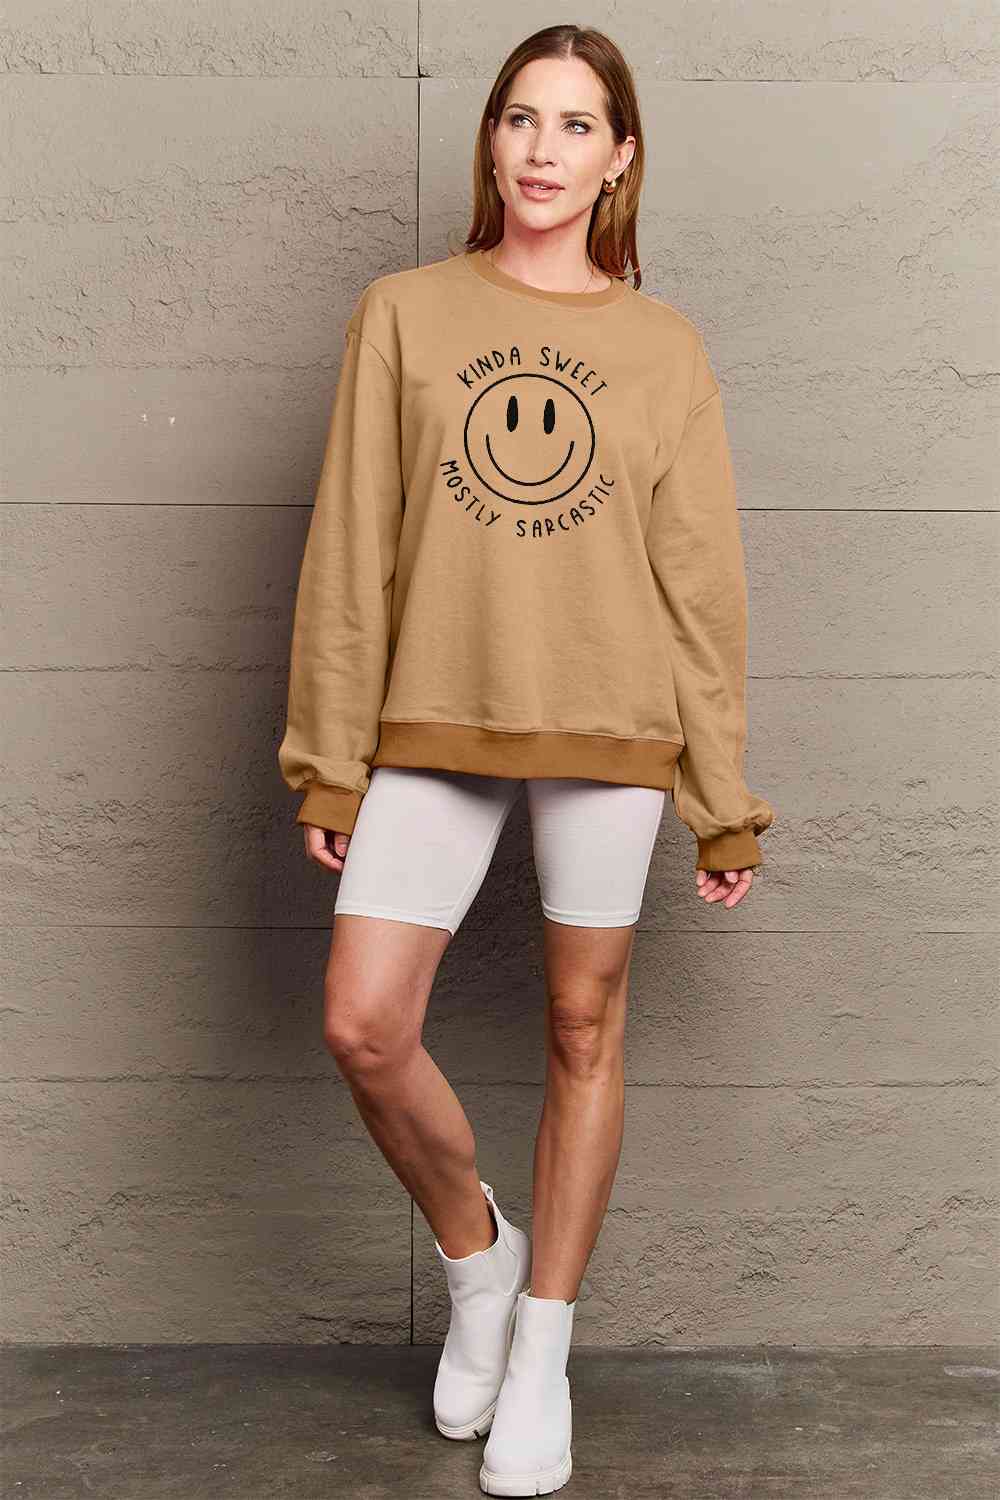 Simply Love Full Size Smiling Face Graphic Sweatshirt